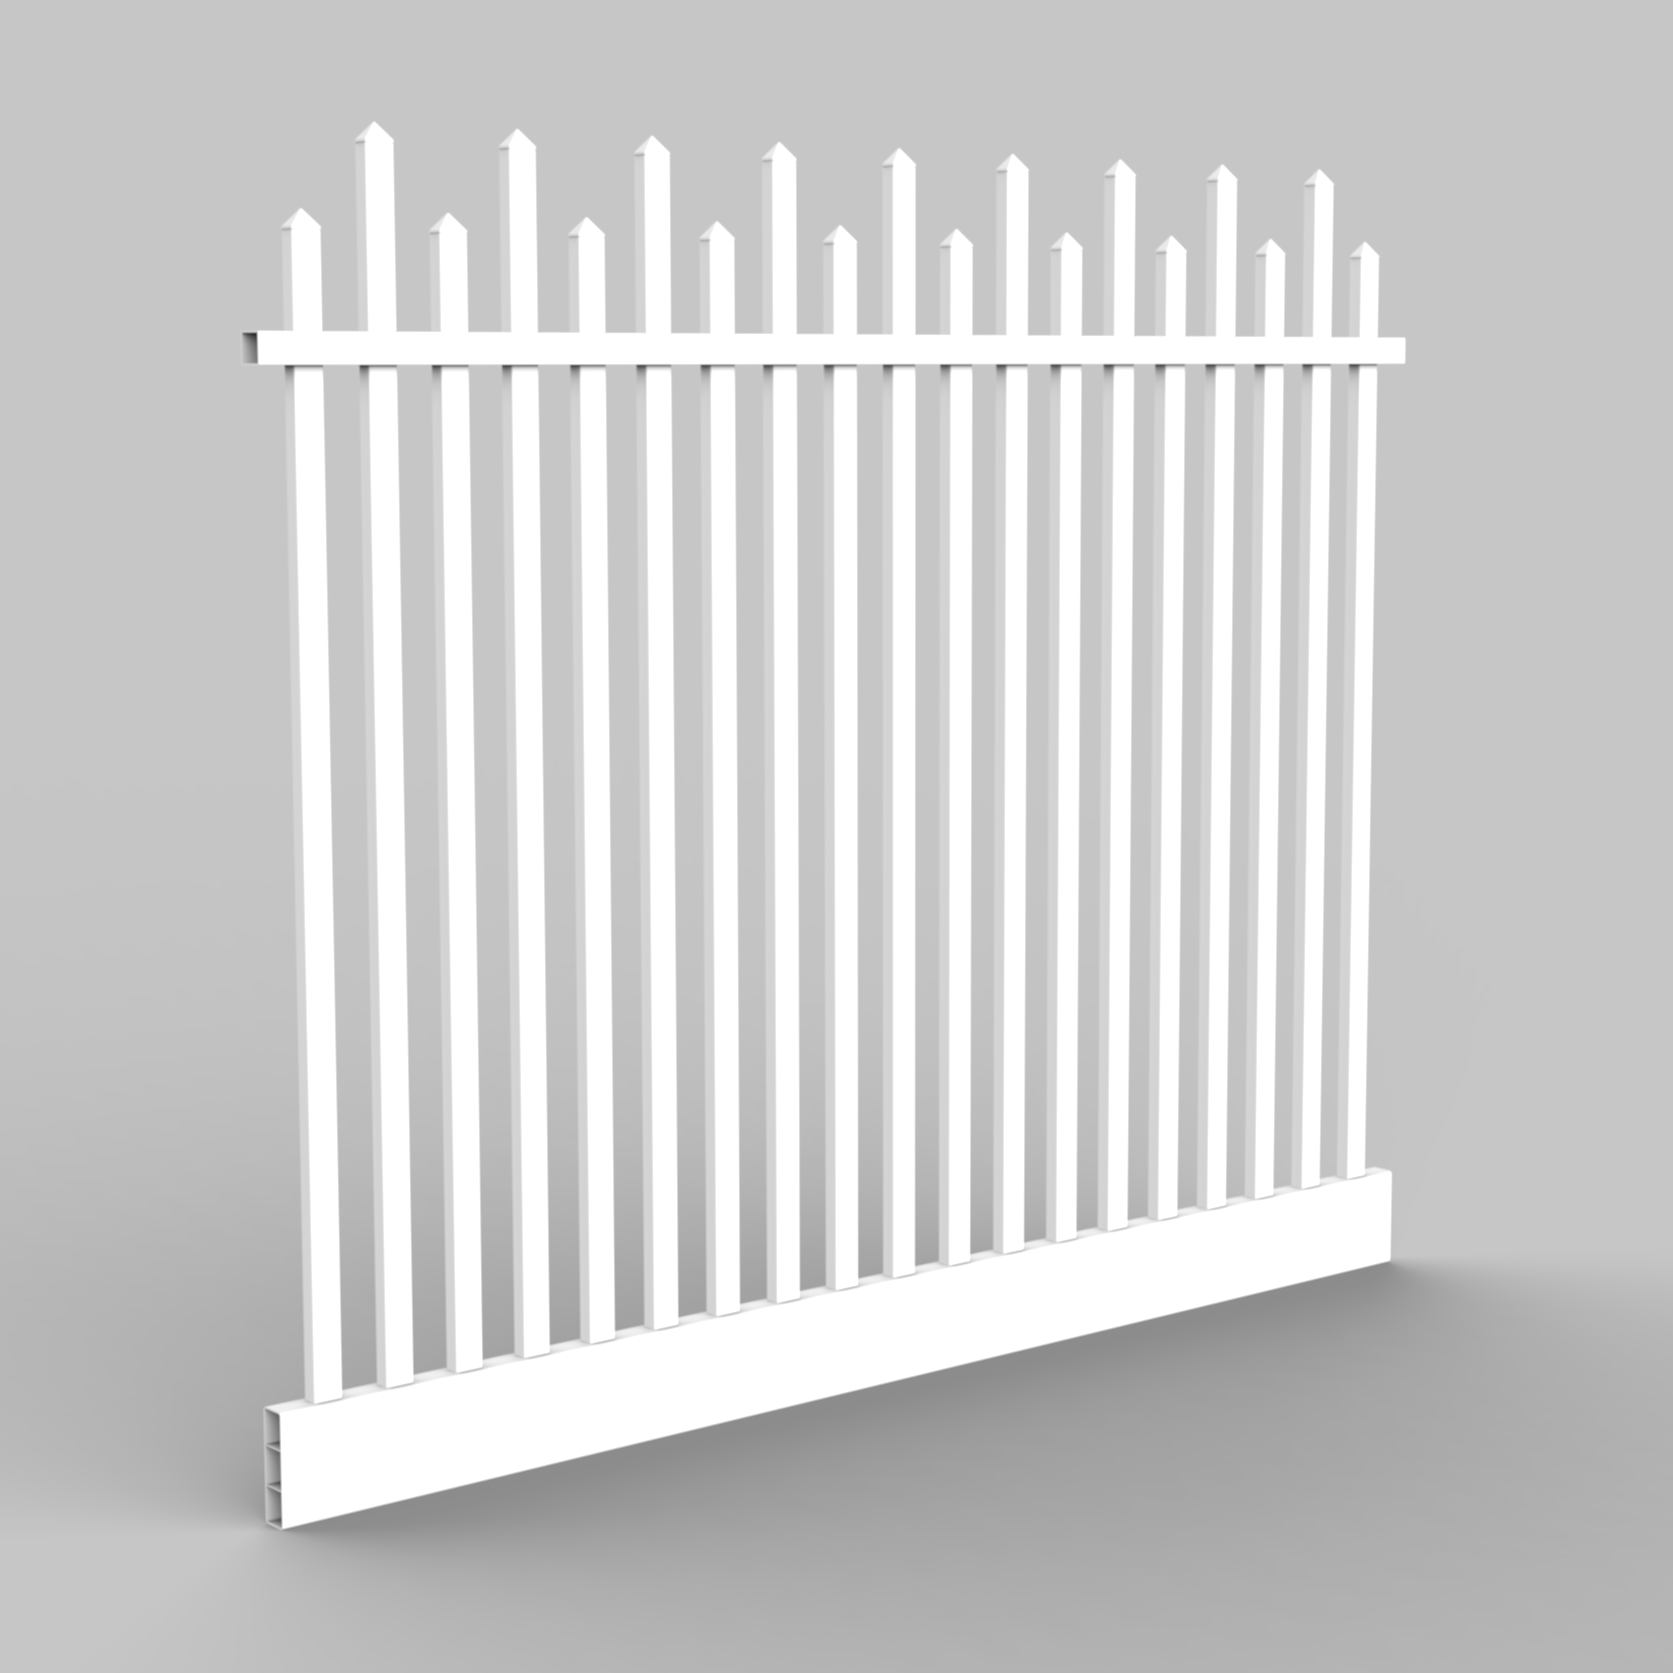 EAPC Tonish Vinyl Picket Fence with Staggered Top